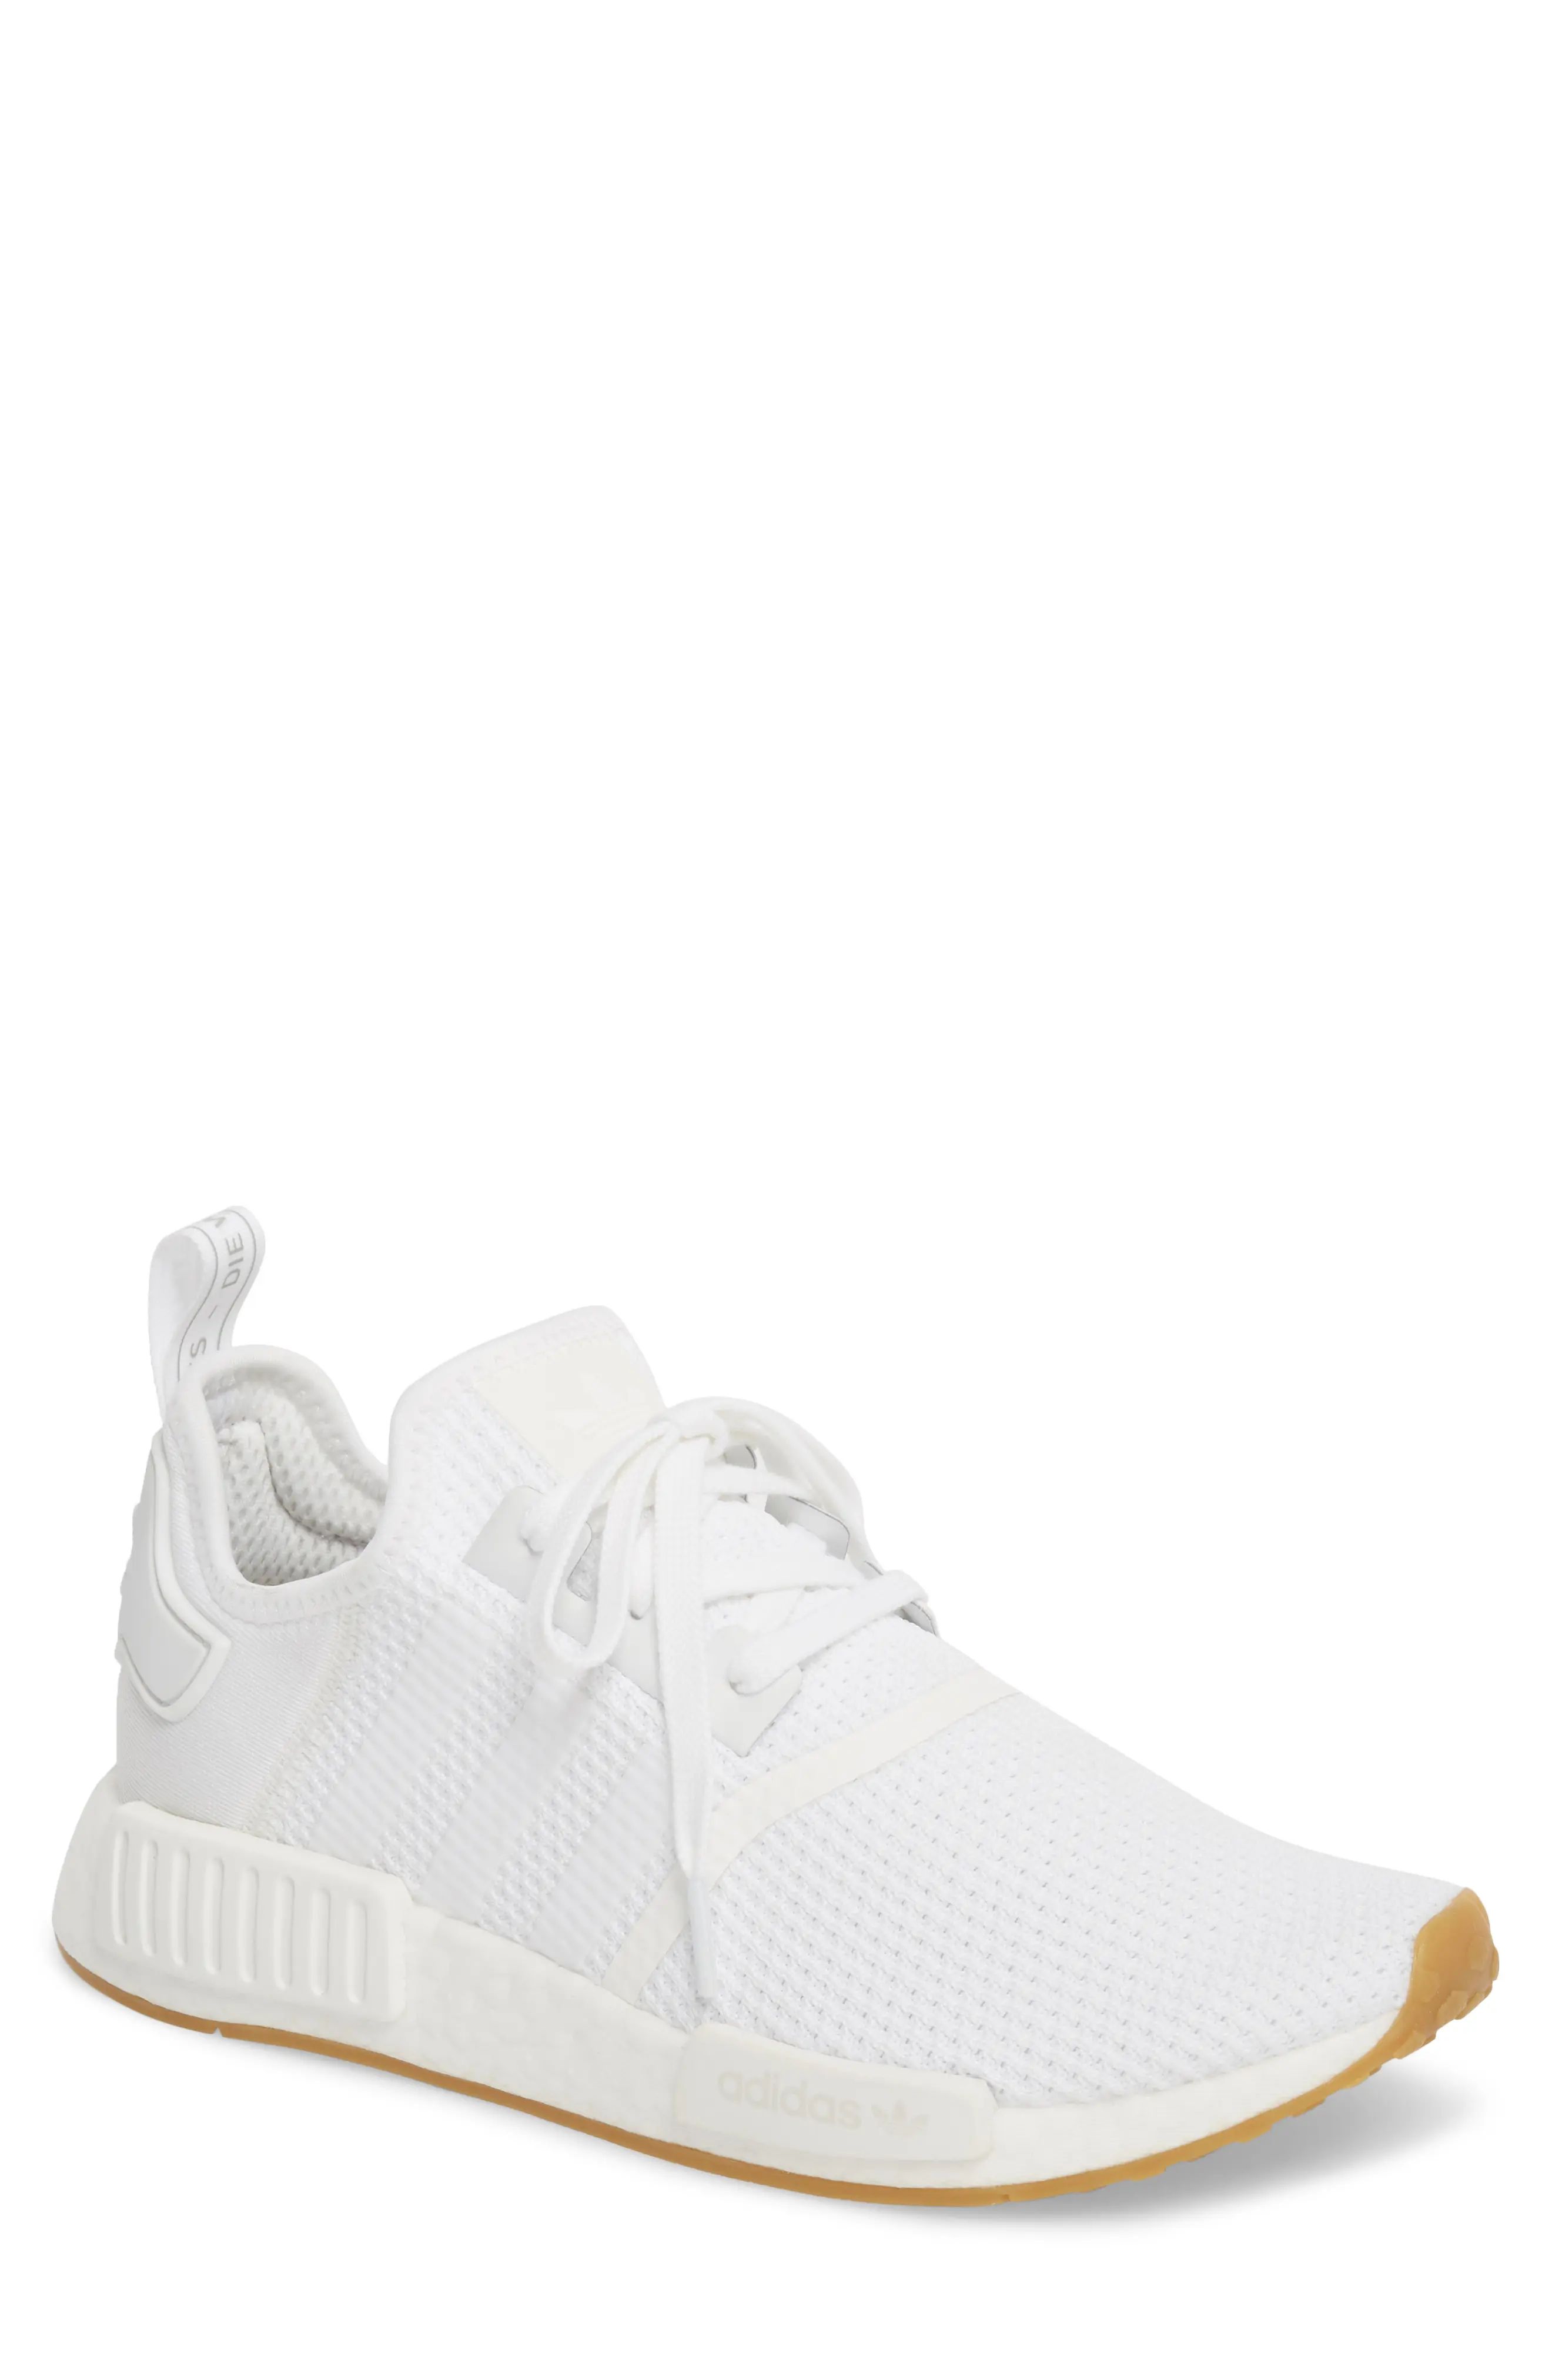 adidas Originals NMD R1 Sneaker in White/White/Gum at Nordstrom, Size 8 | Nordstrom